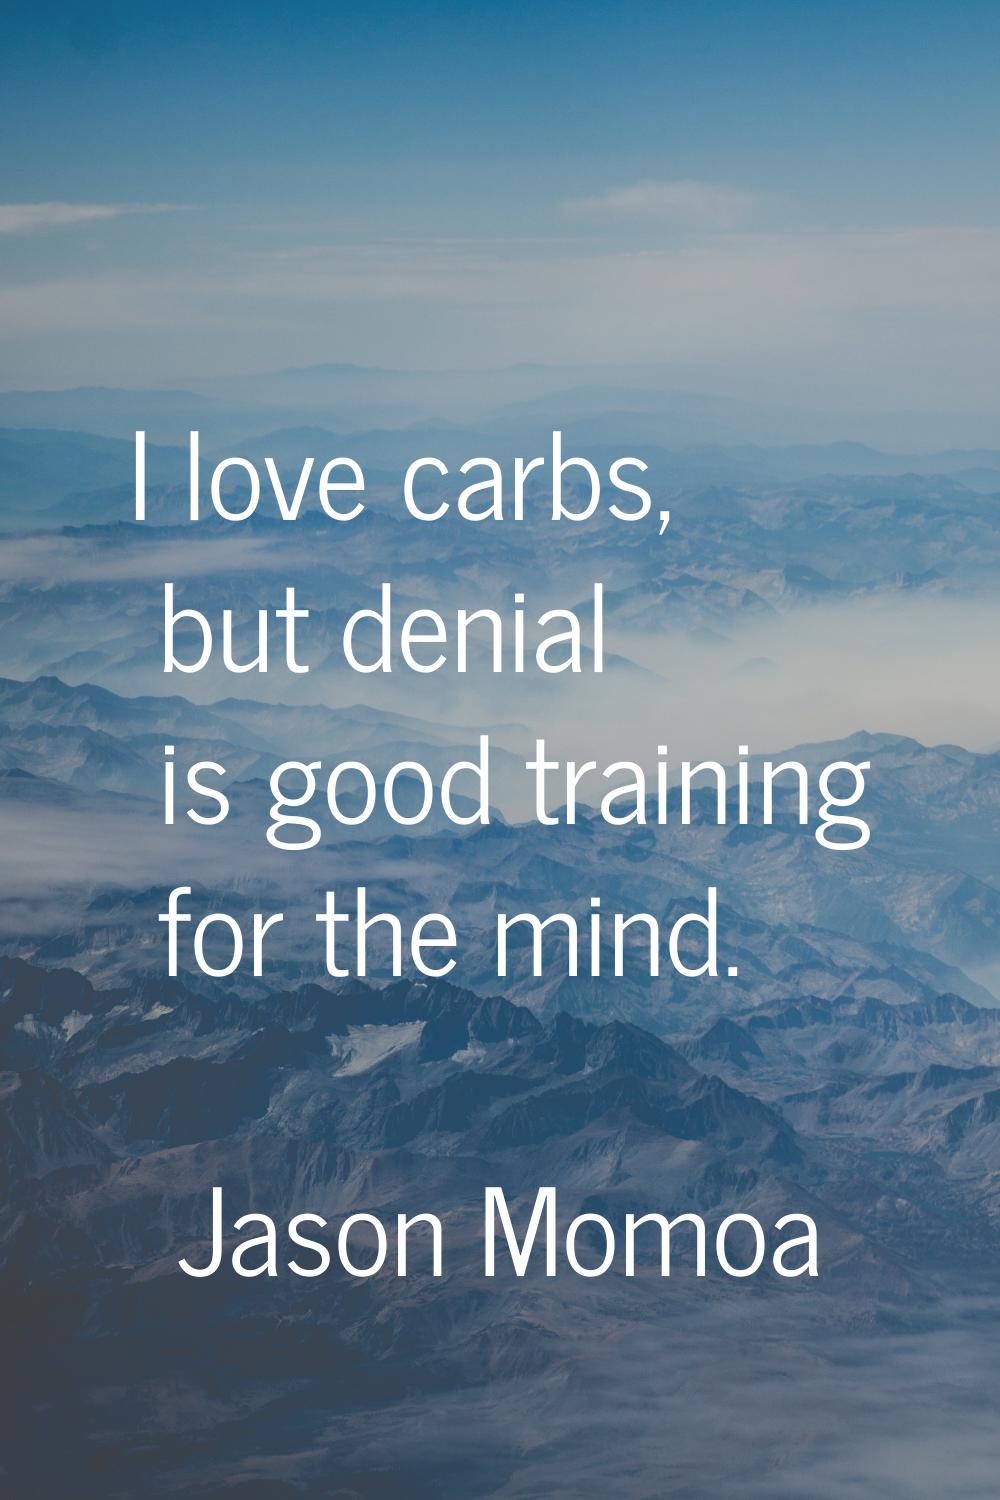 I love carbs, but denial is good training for the mind.